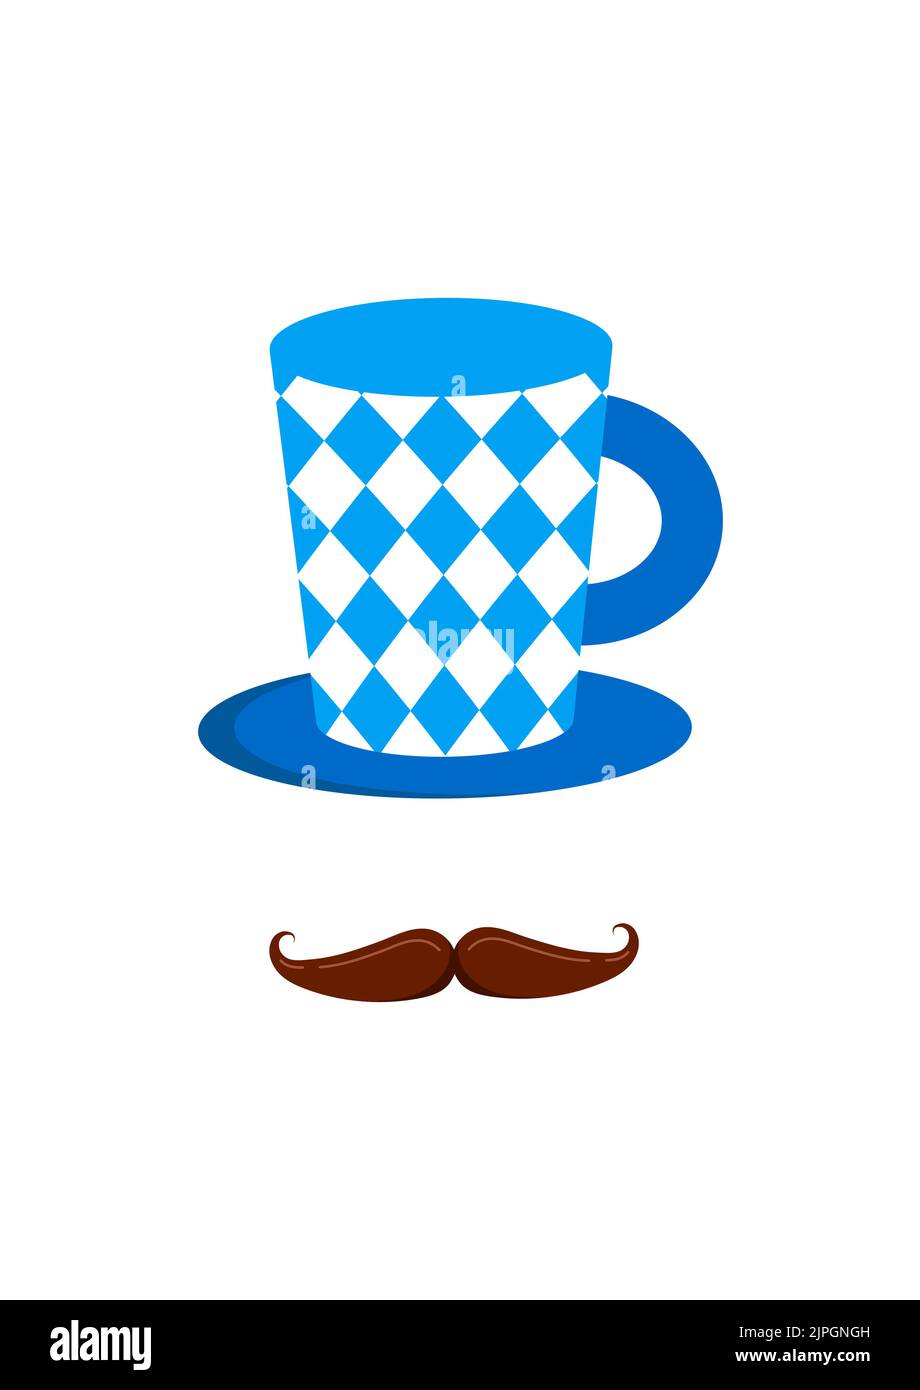 Oktoberfest bavaria party hat with and mustache icon isolated on white background. Stock Vector